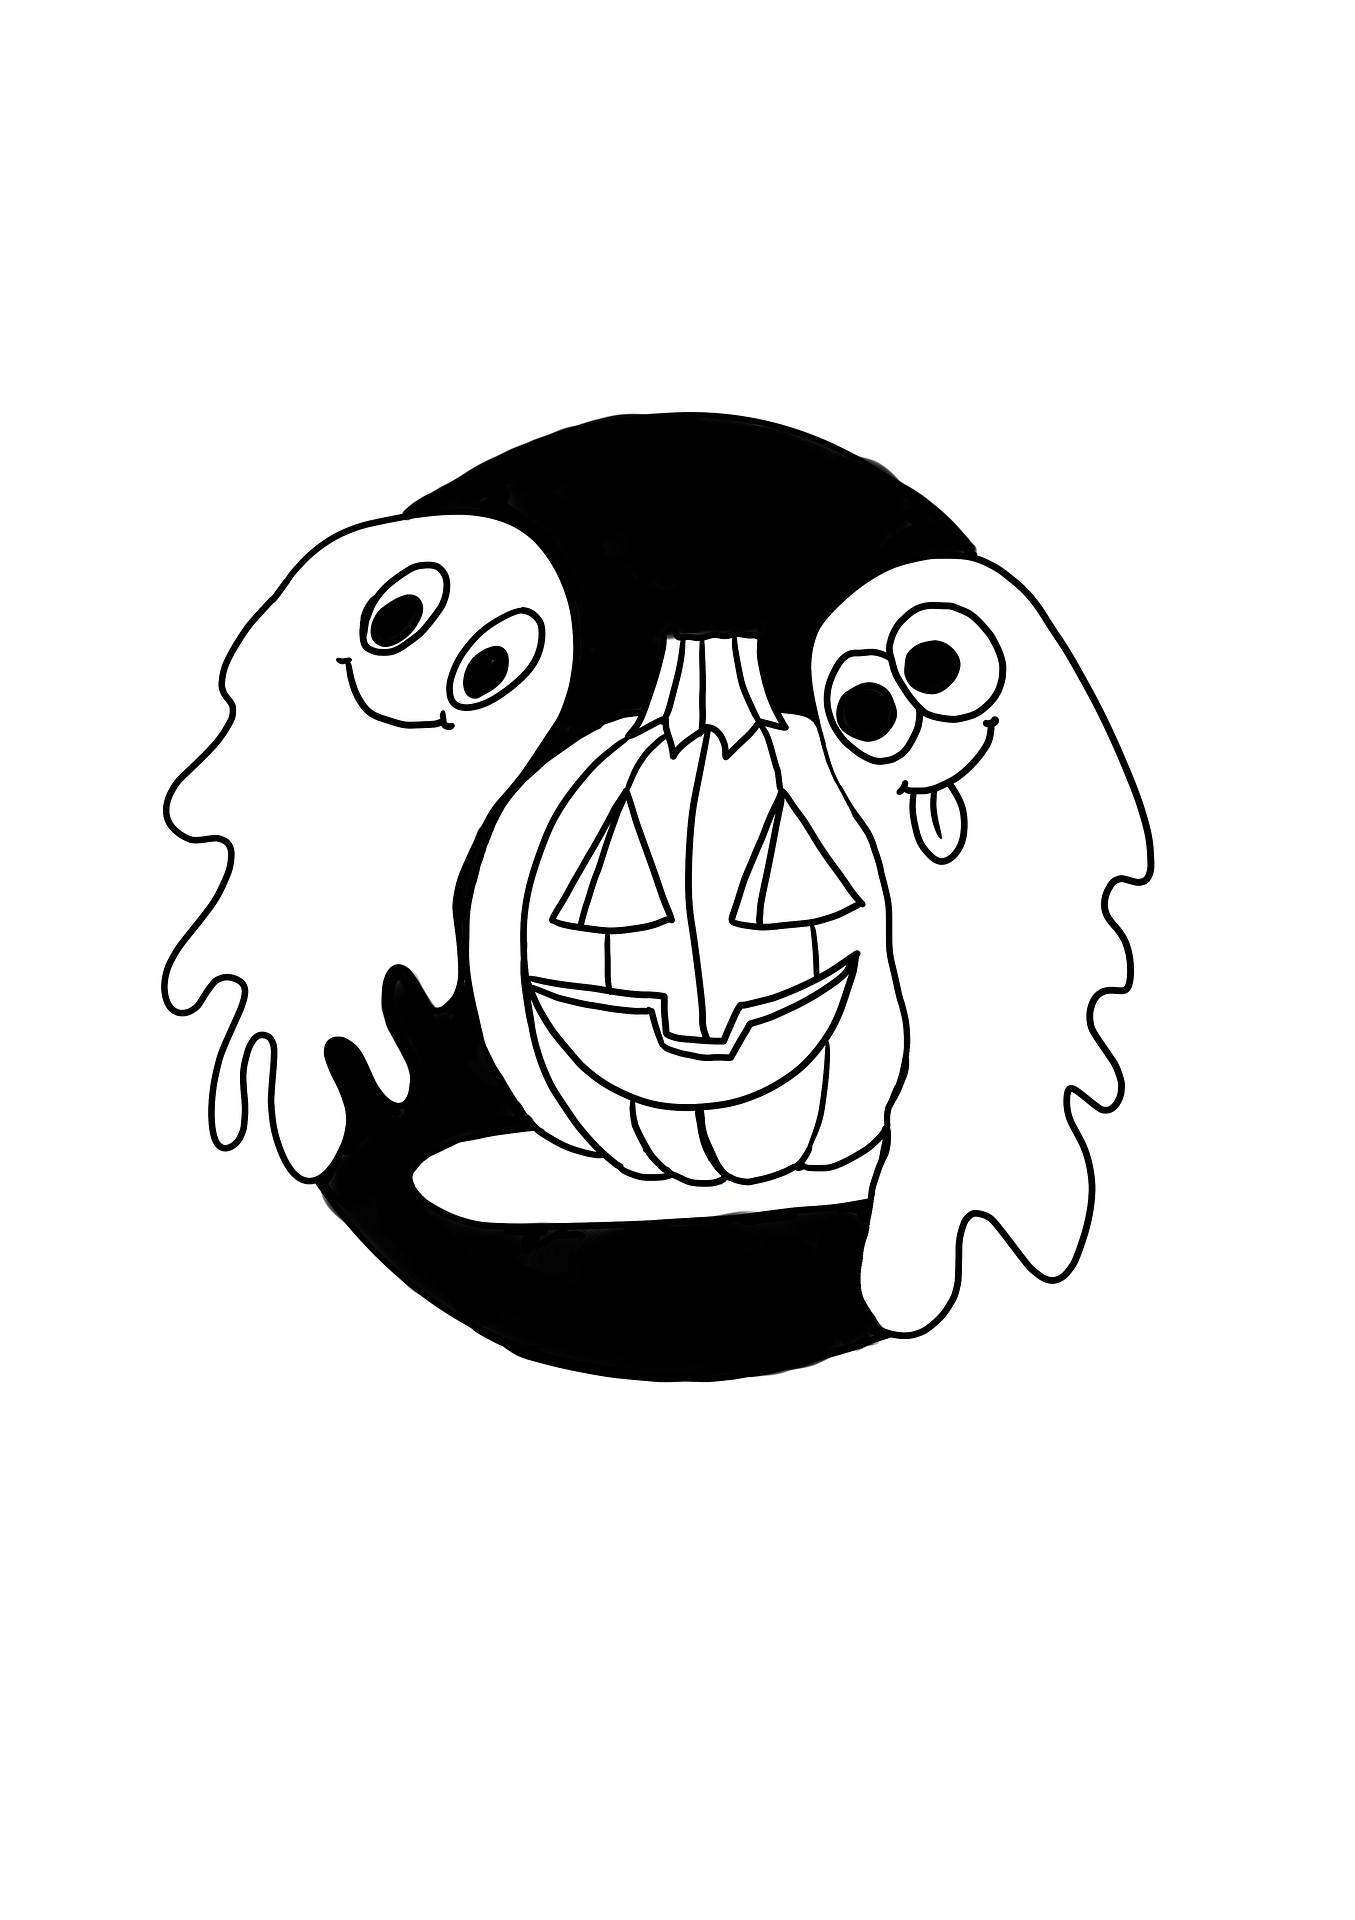 Halloween ghost colouring page